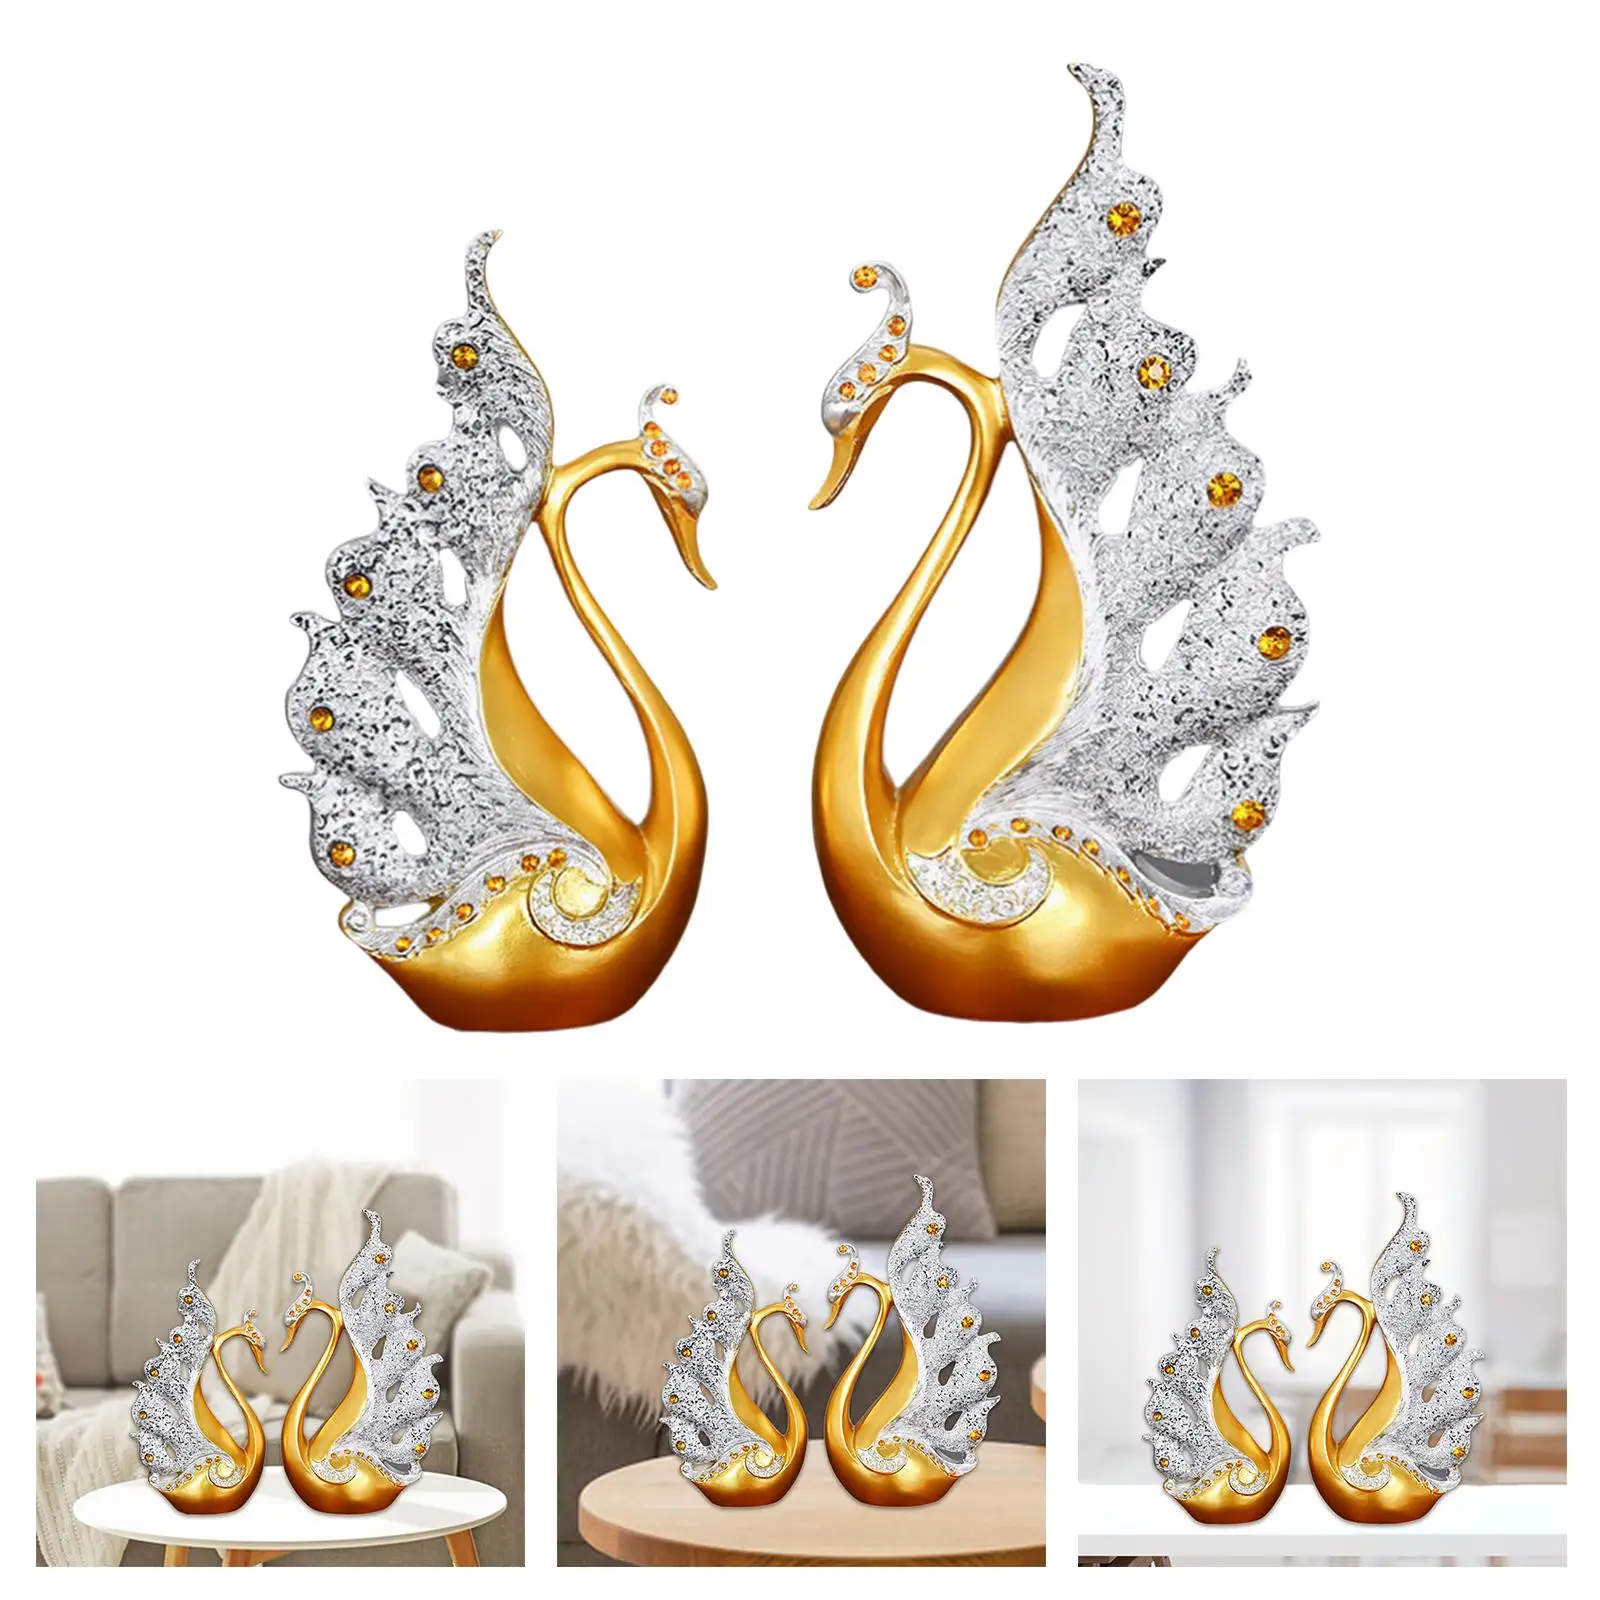 1  Couple of Swan Statue Figurines Resin Ornaments Tabletop  Decor